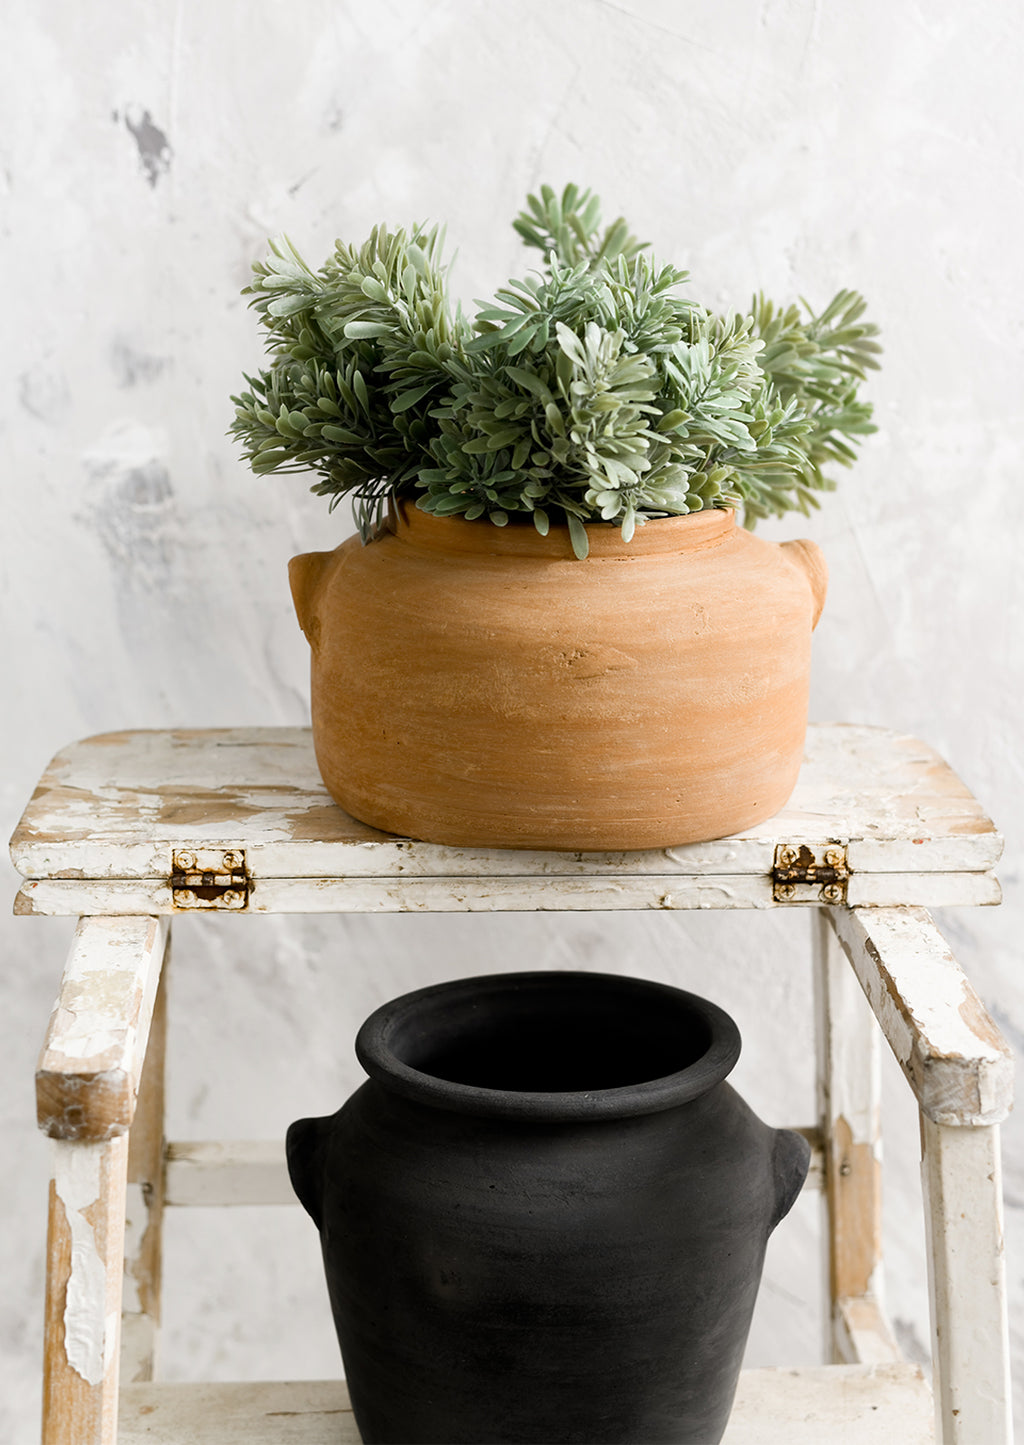 3: Weathered clay pots on a step stool.